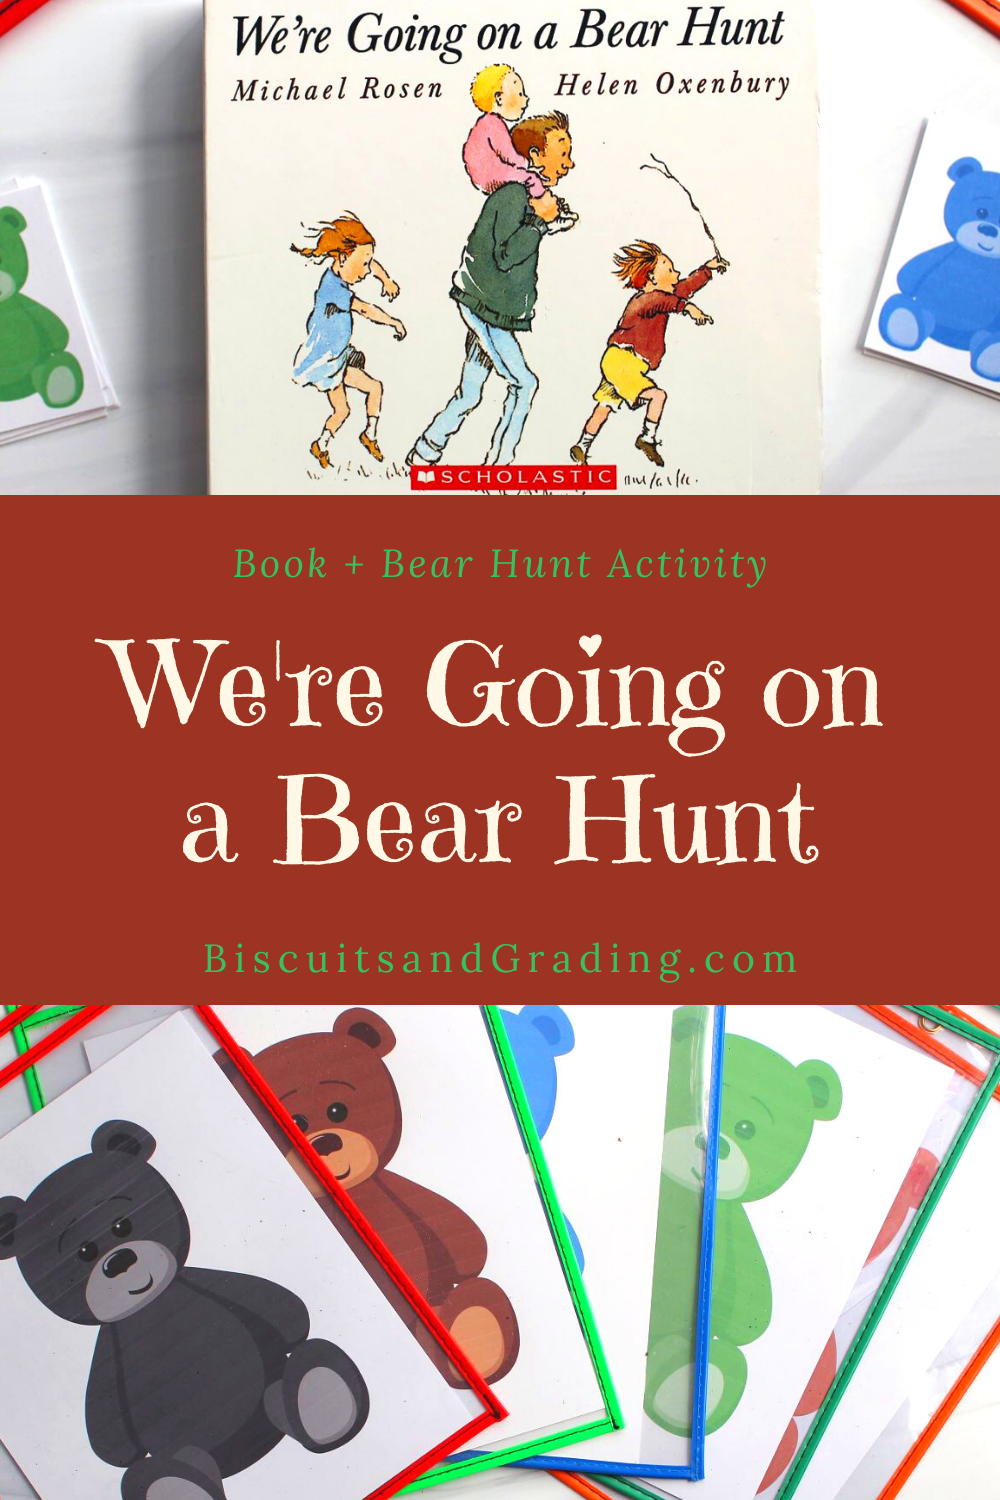 We're Going on a Bear Hunt 2